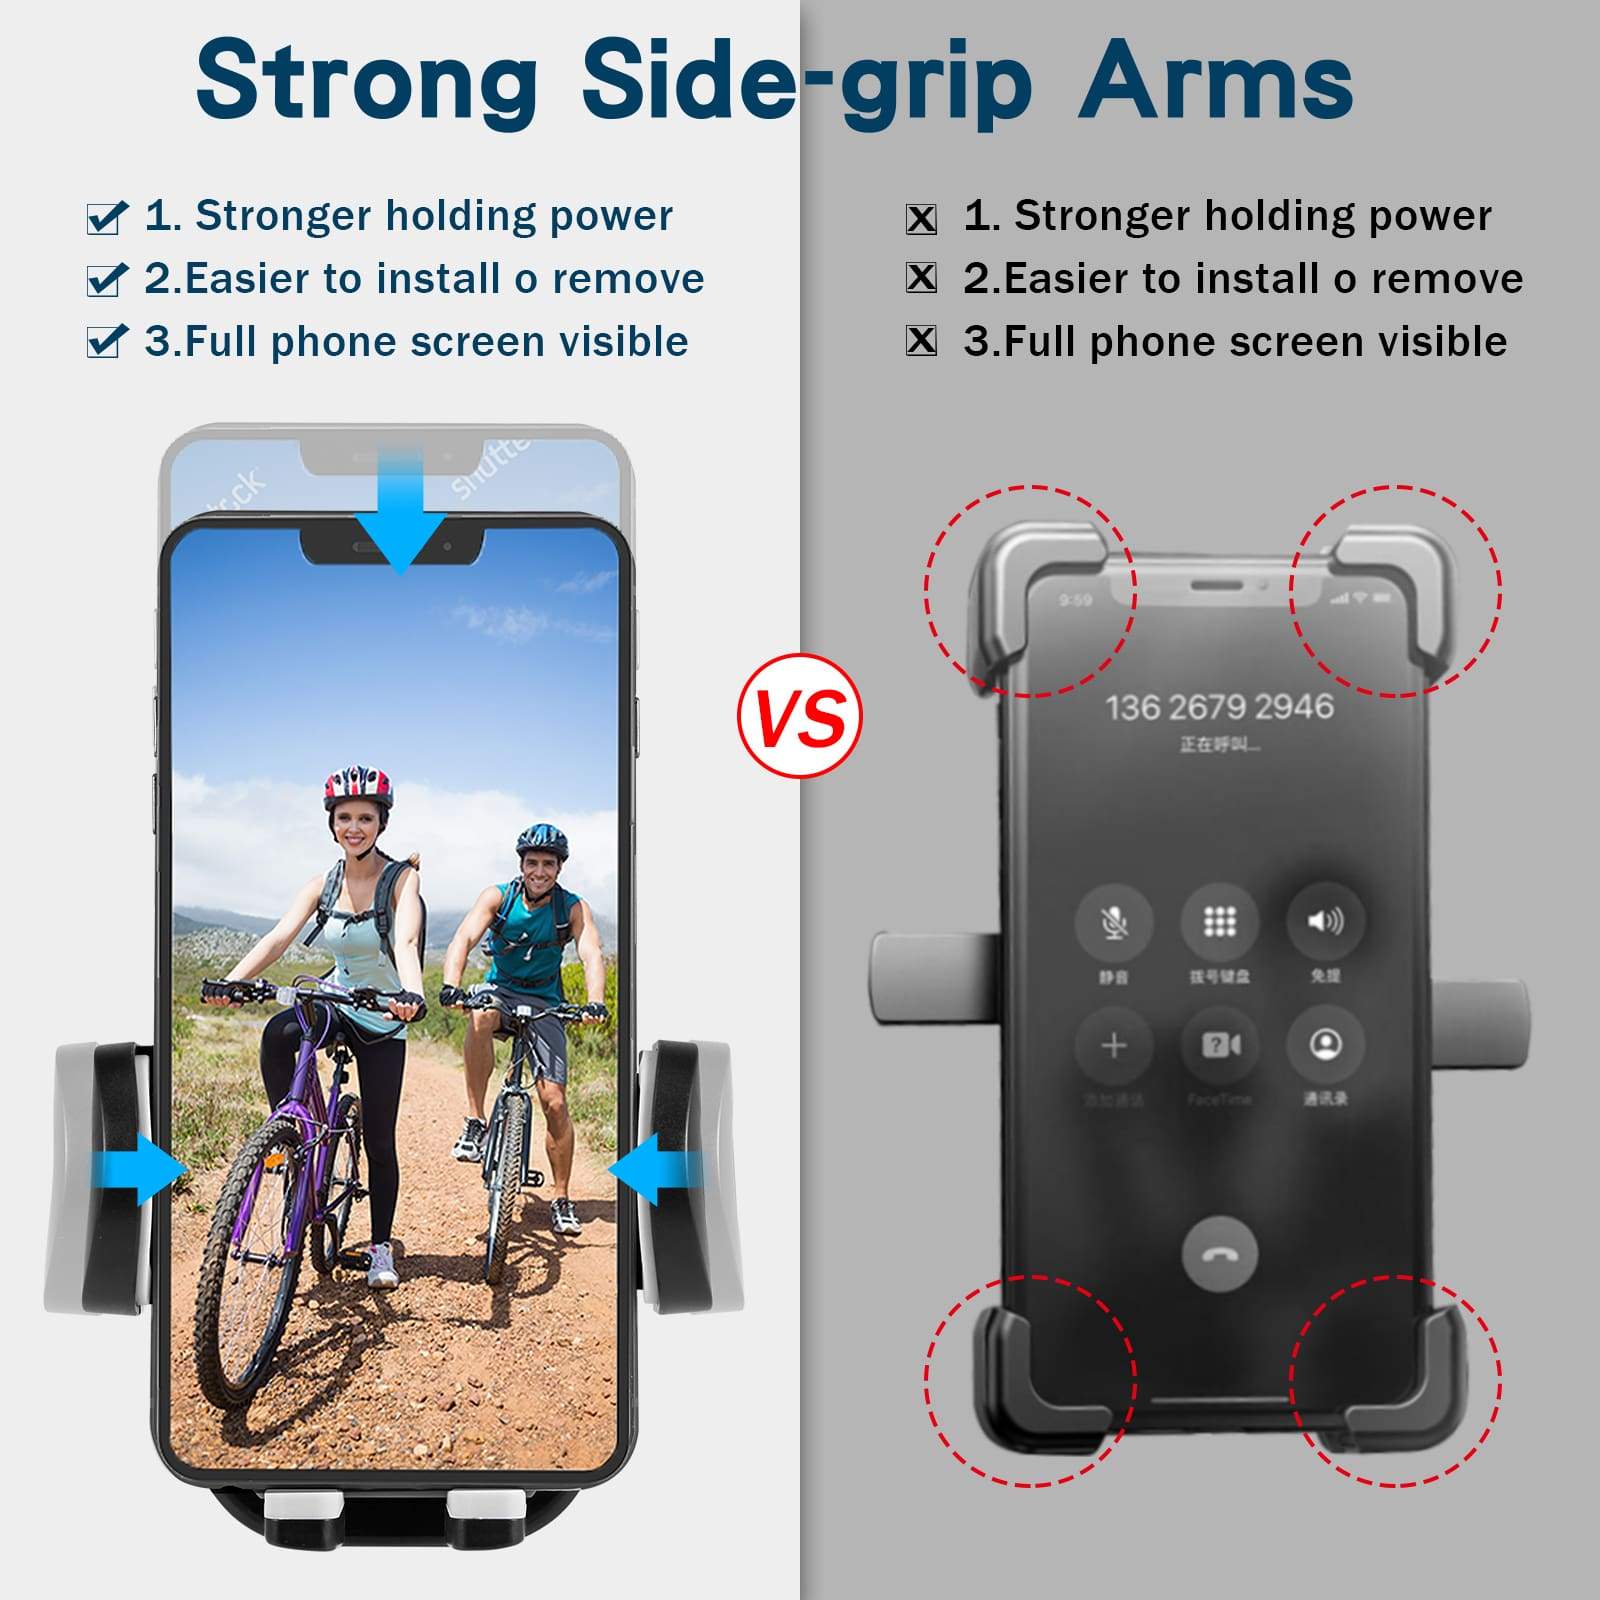 bike phone holder with strong side-grip arms